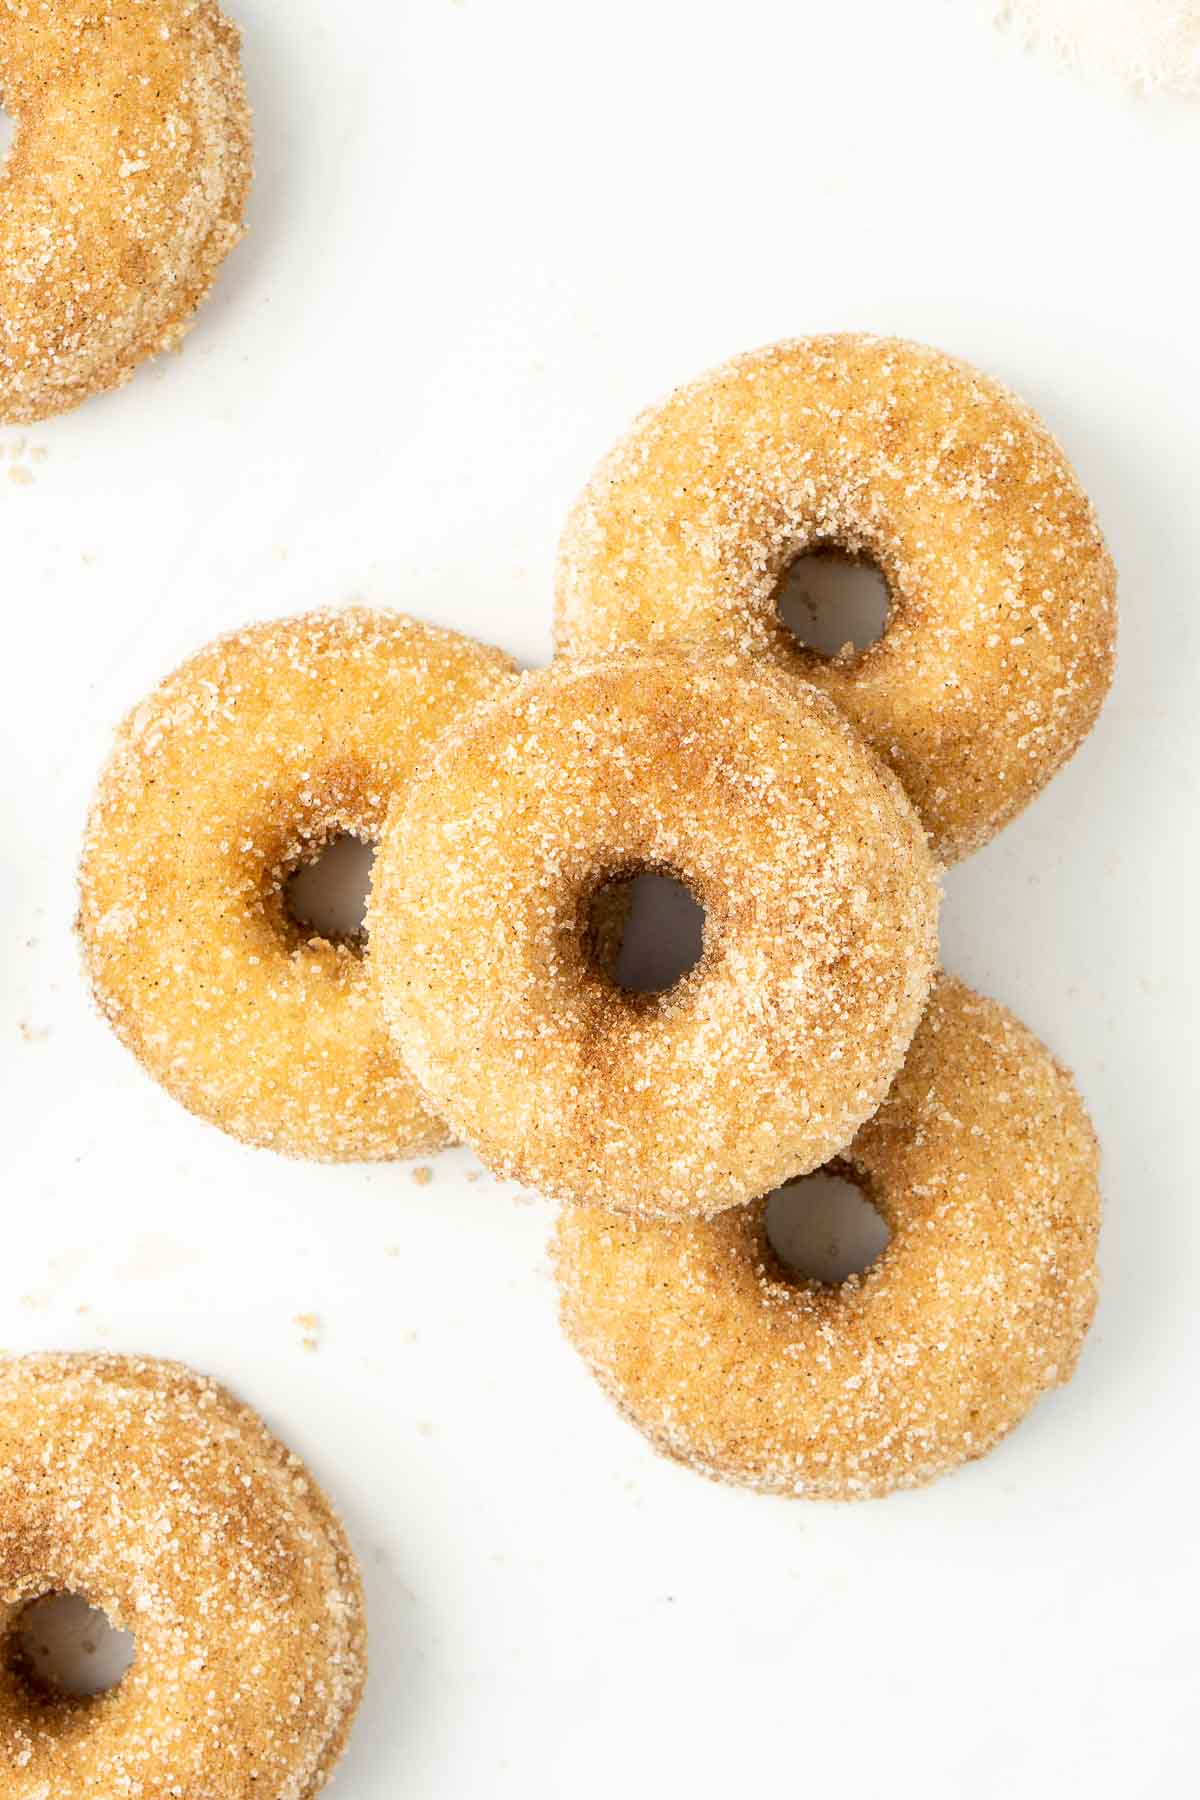 Four cinnamon sugar doughnuts stacked on top of each other from above.